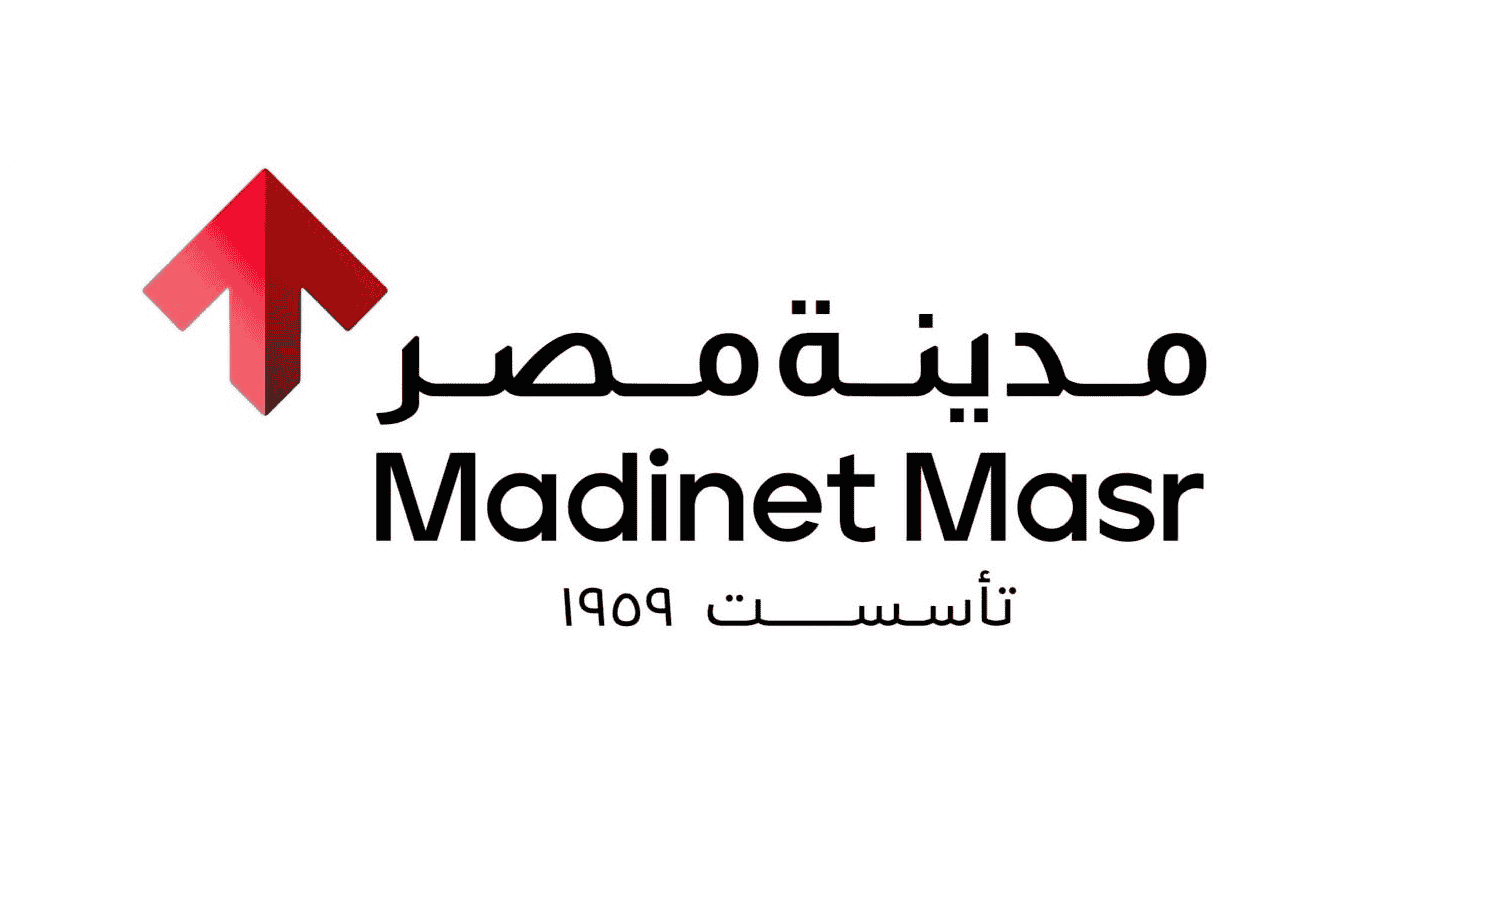 Madinet Masr’s consolidated profits surge 152.93% YoY in Q1
